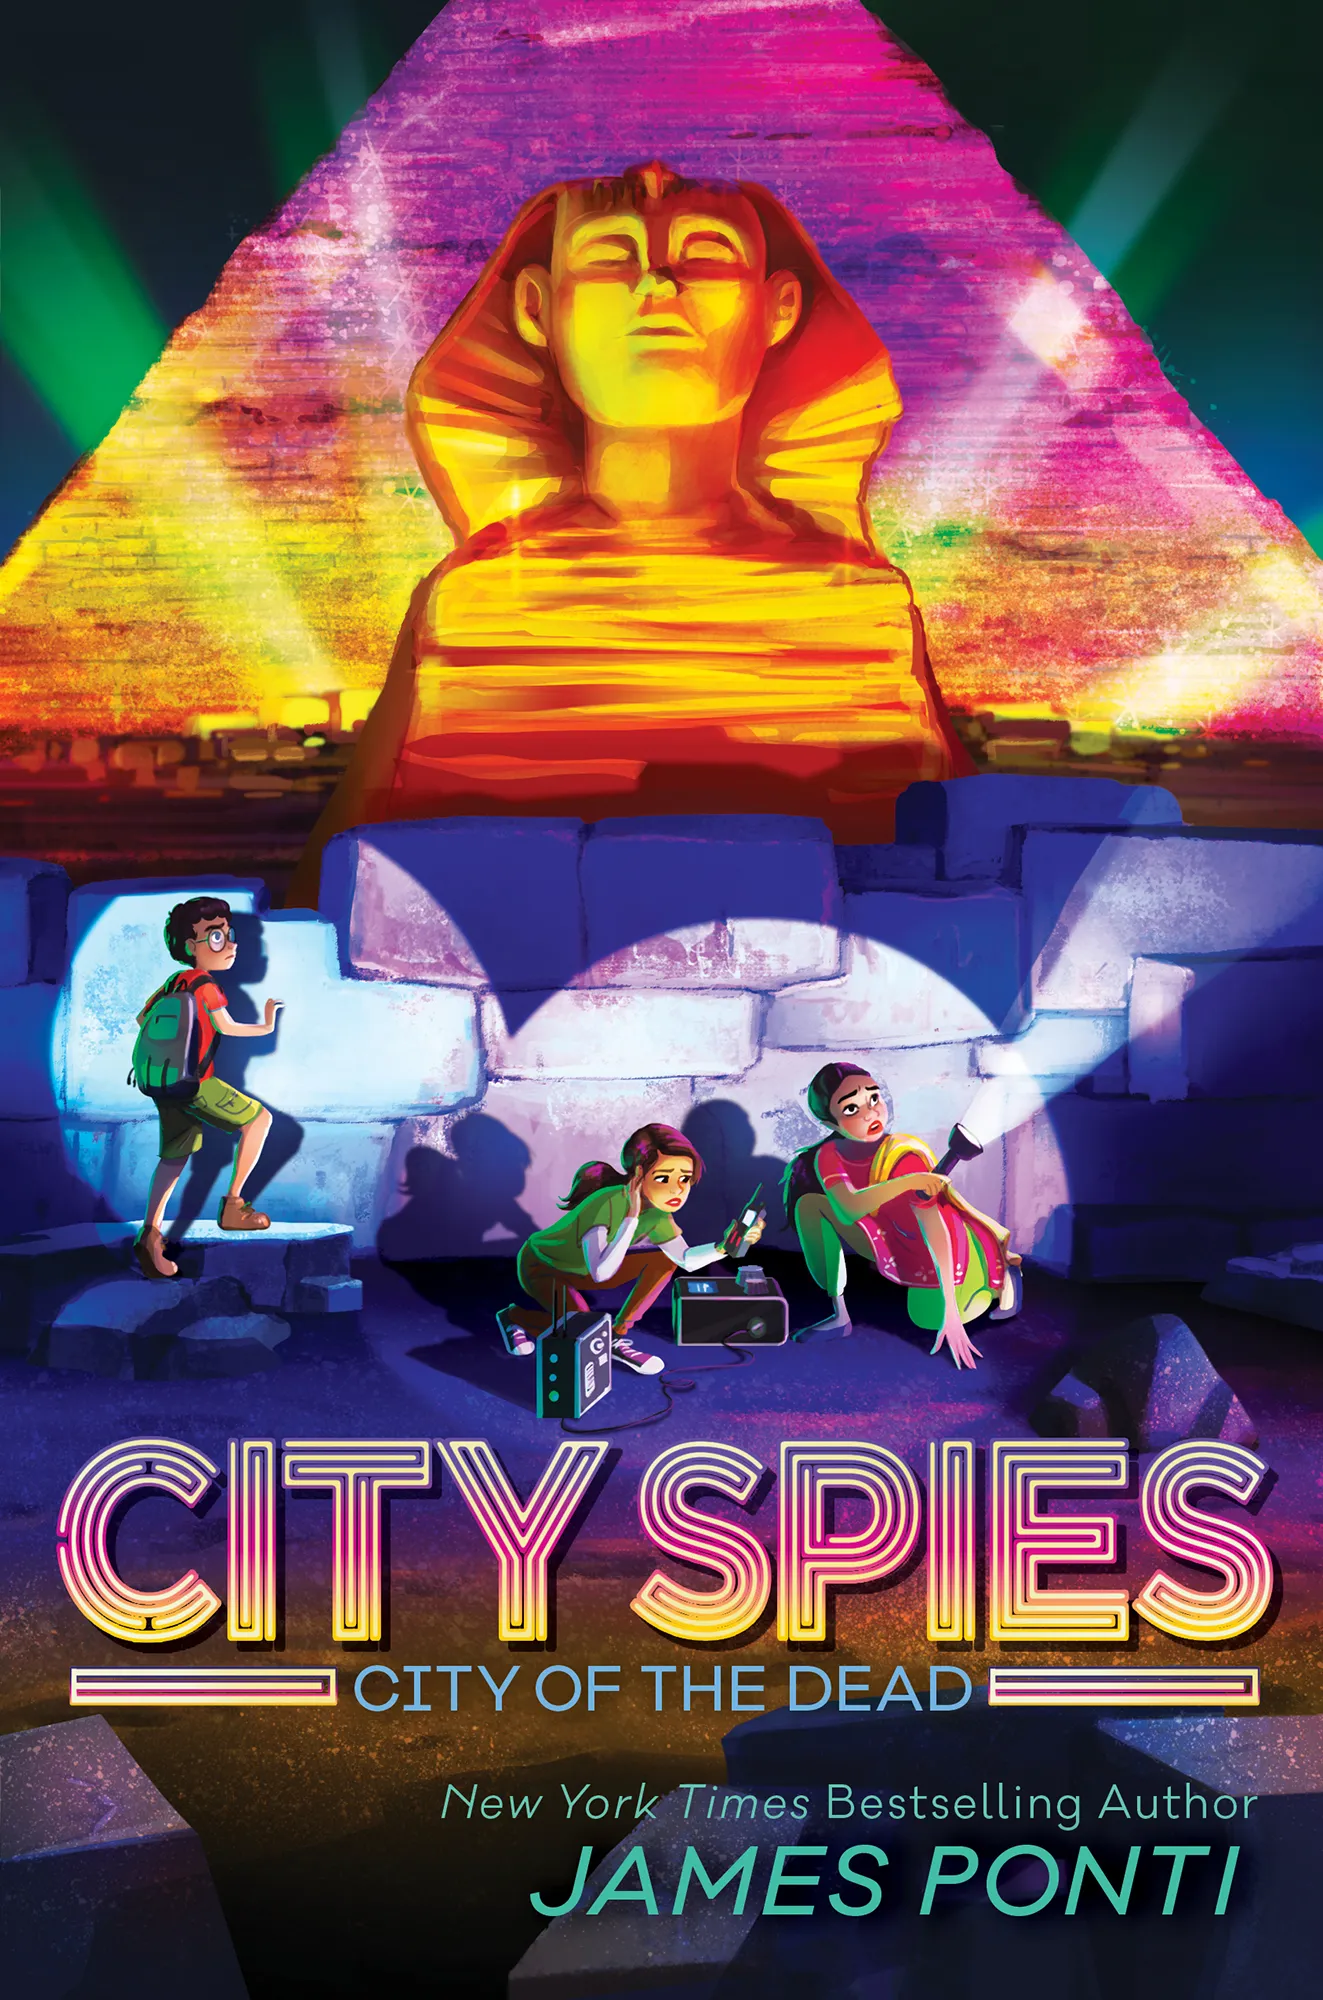 City of the Dead (City Spies #4)